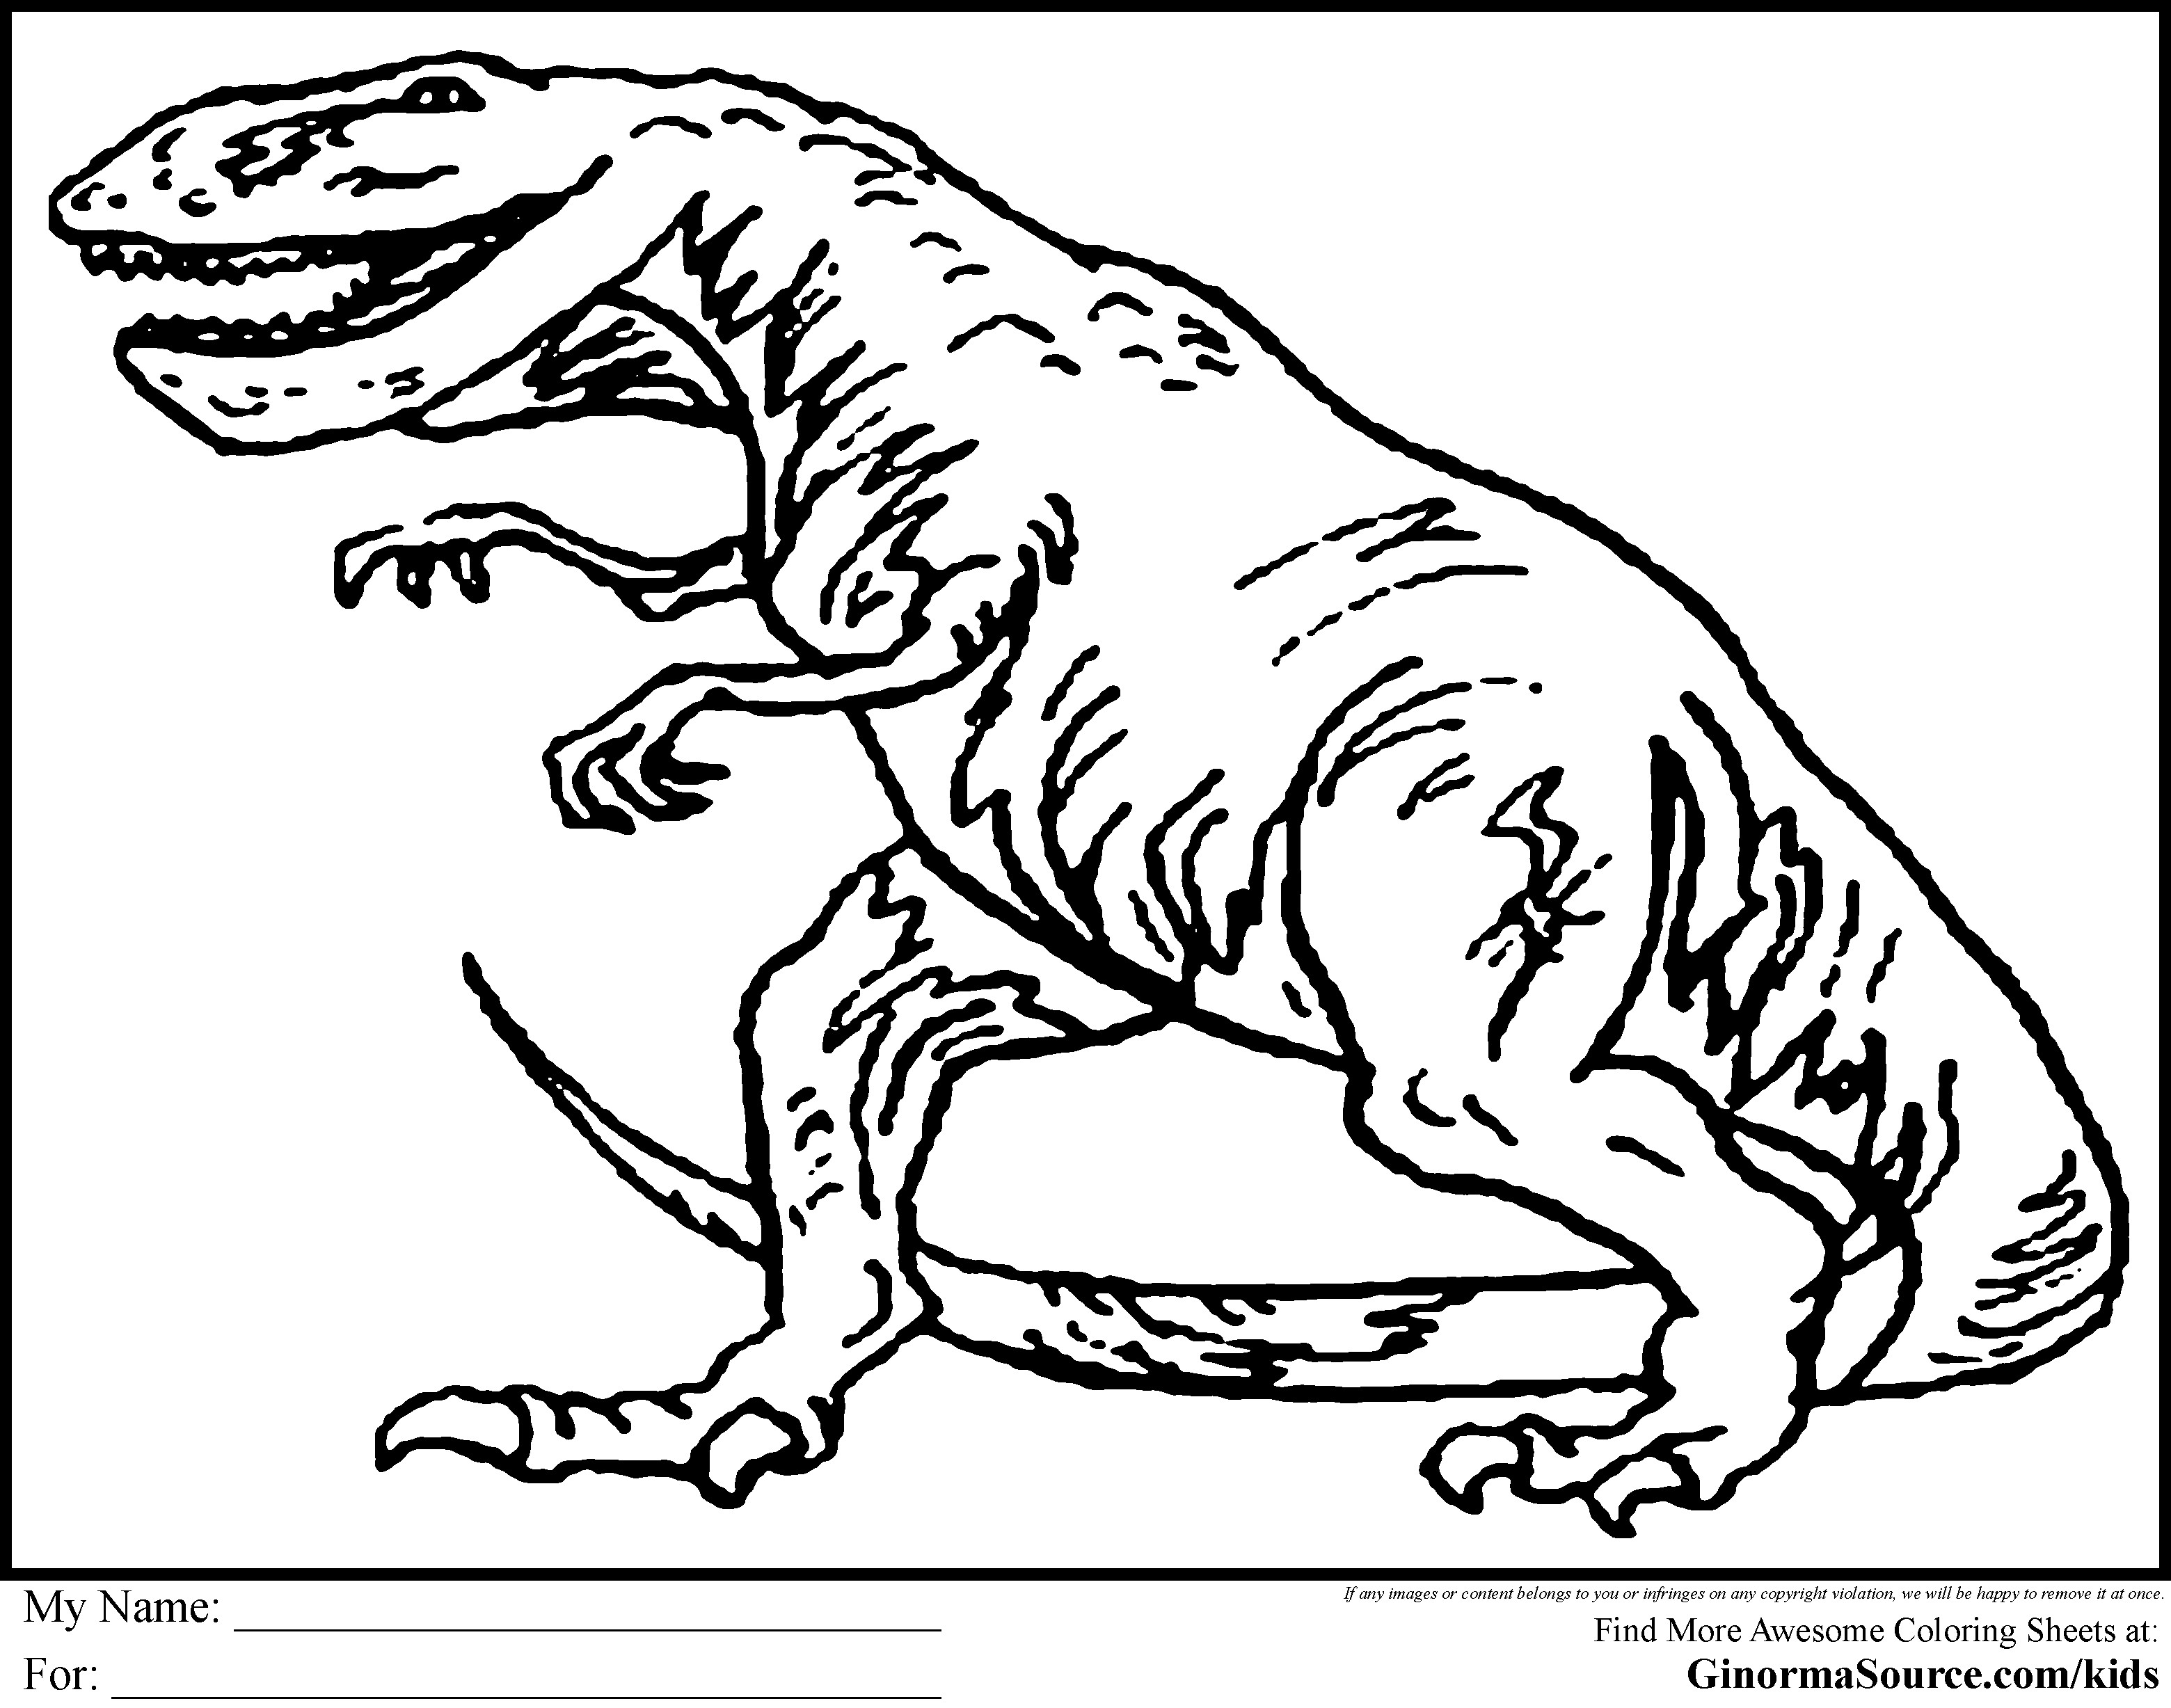 Coloring Pages For Boys Dinosaur
 Extinct Animals 36 Printable Dinosaur coloring pages